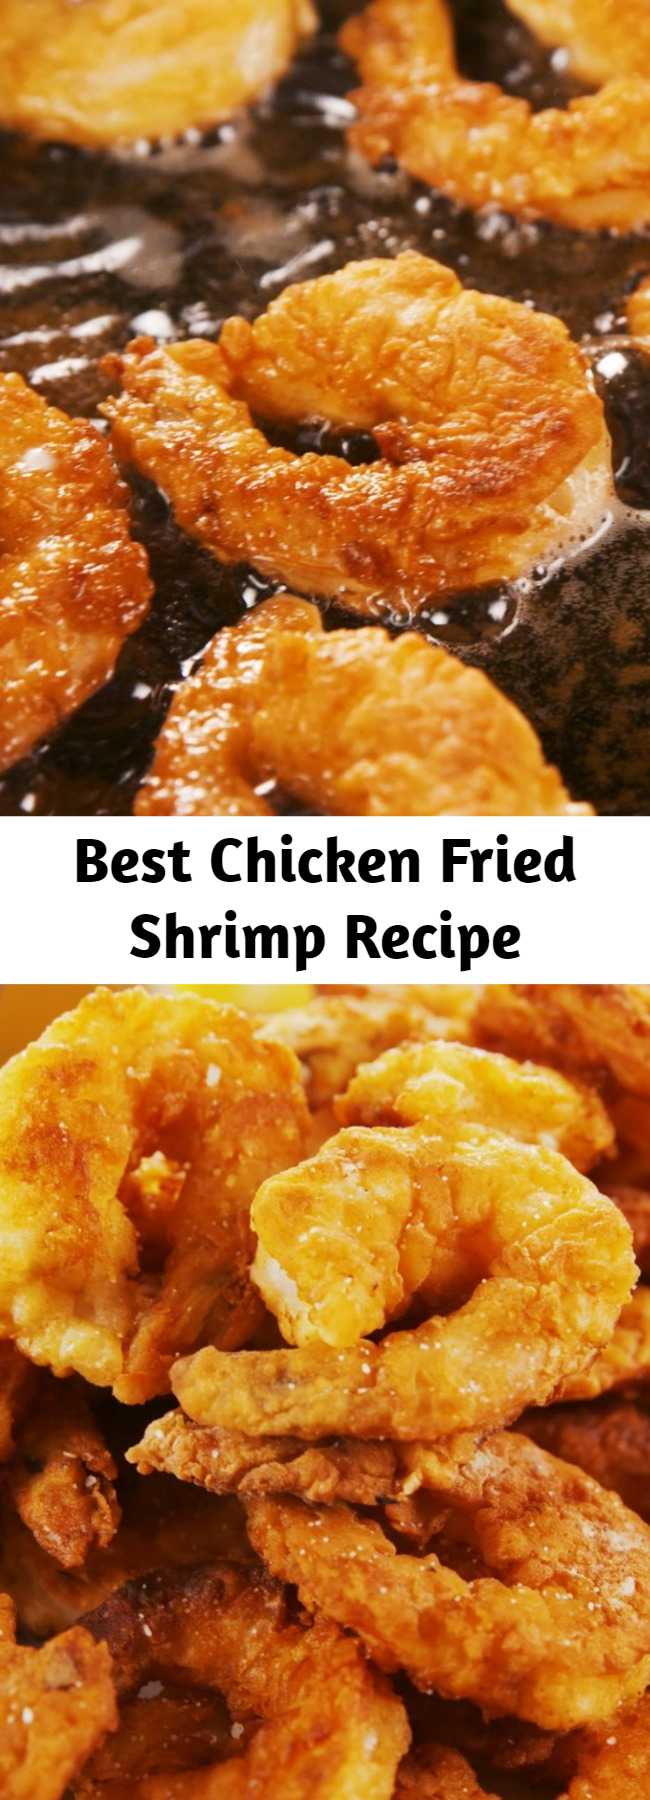 Best Chicken Fried Shrimp Recipe - If you can make chicken fried steak, you can make chicken fried anything — including shrimp. Though it's certainly not healthy, this won't leave you wanting to take a nap all day afterwards as steak would.